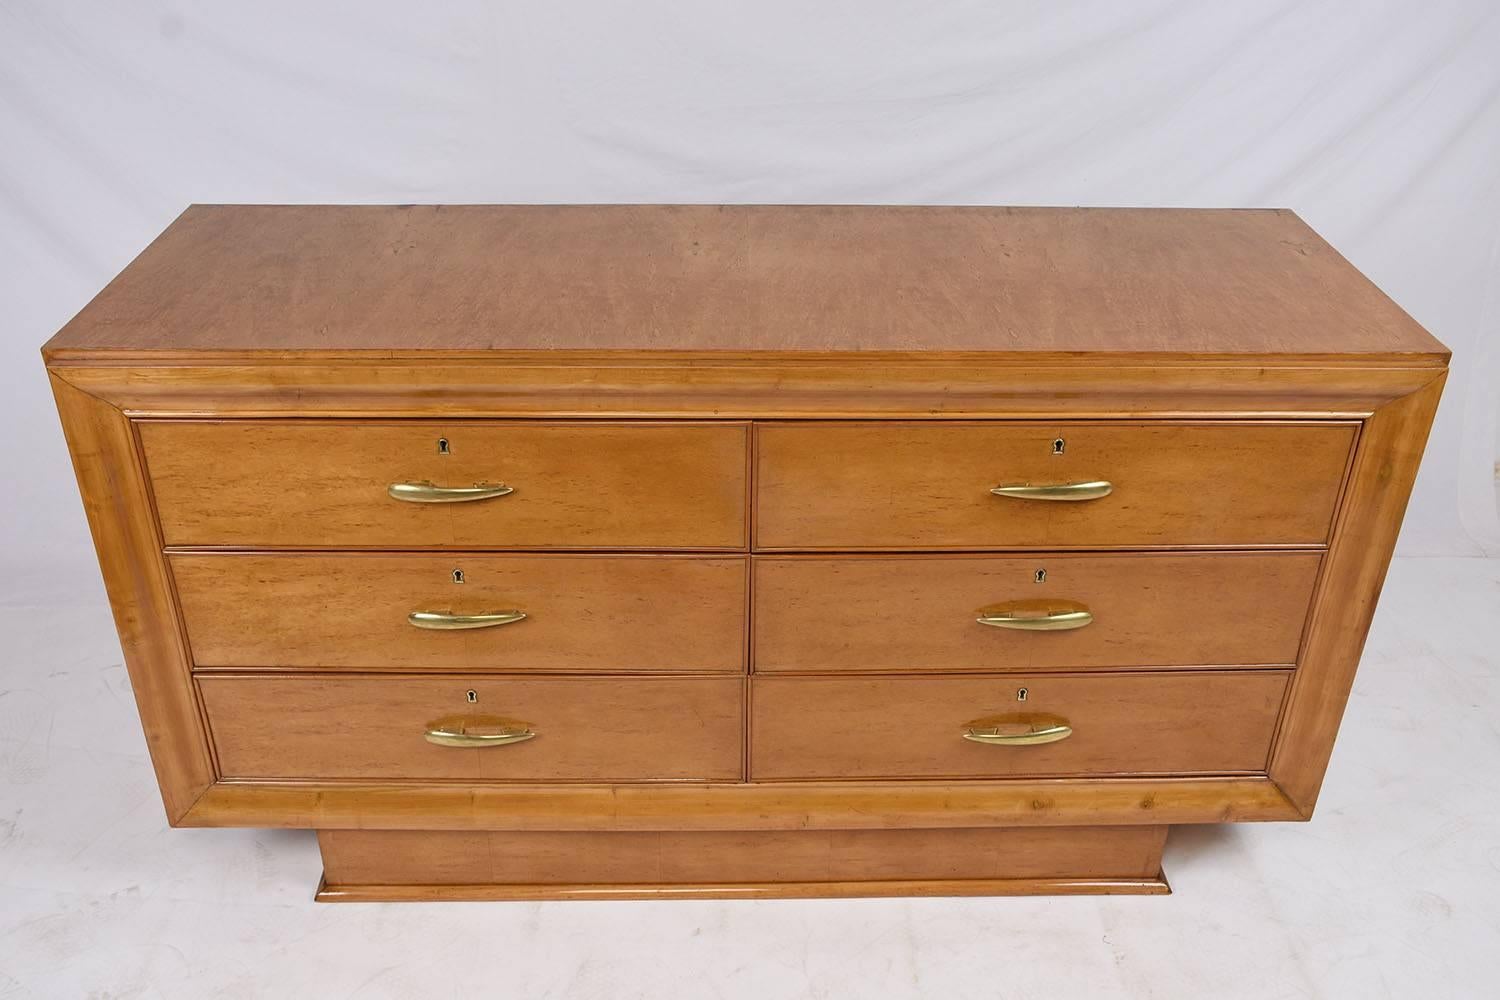 This 1930s Mid-Century Modern style chest of drawers is made from wood that has been adorned with beautiful birch wood veneers. The facade of this chest is defined by thick moulding details surrounding the six drawers. Each drawer has a brass handle